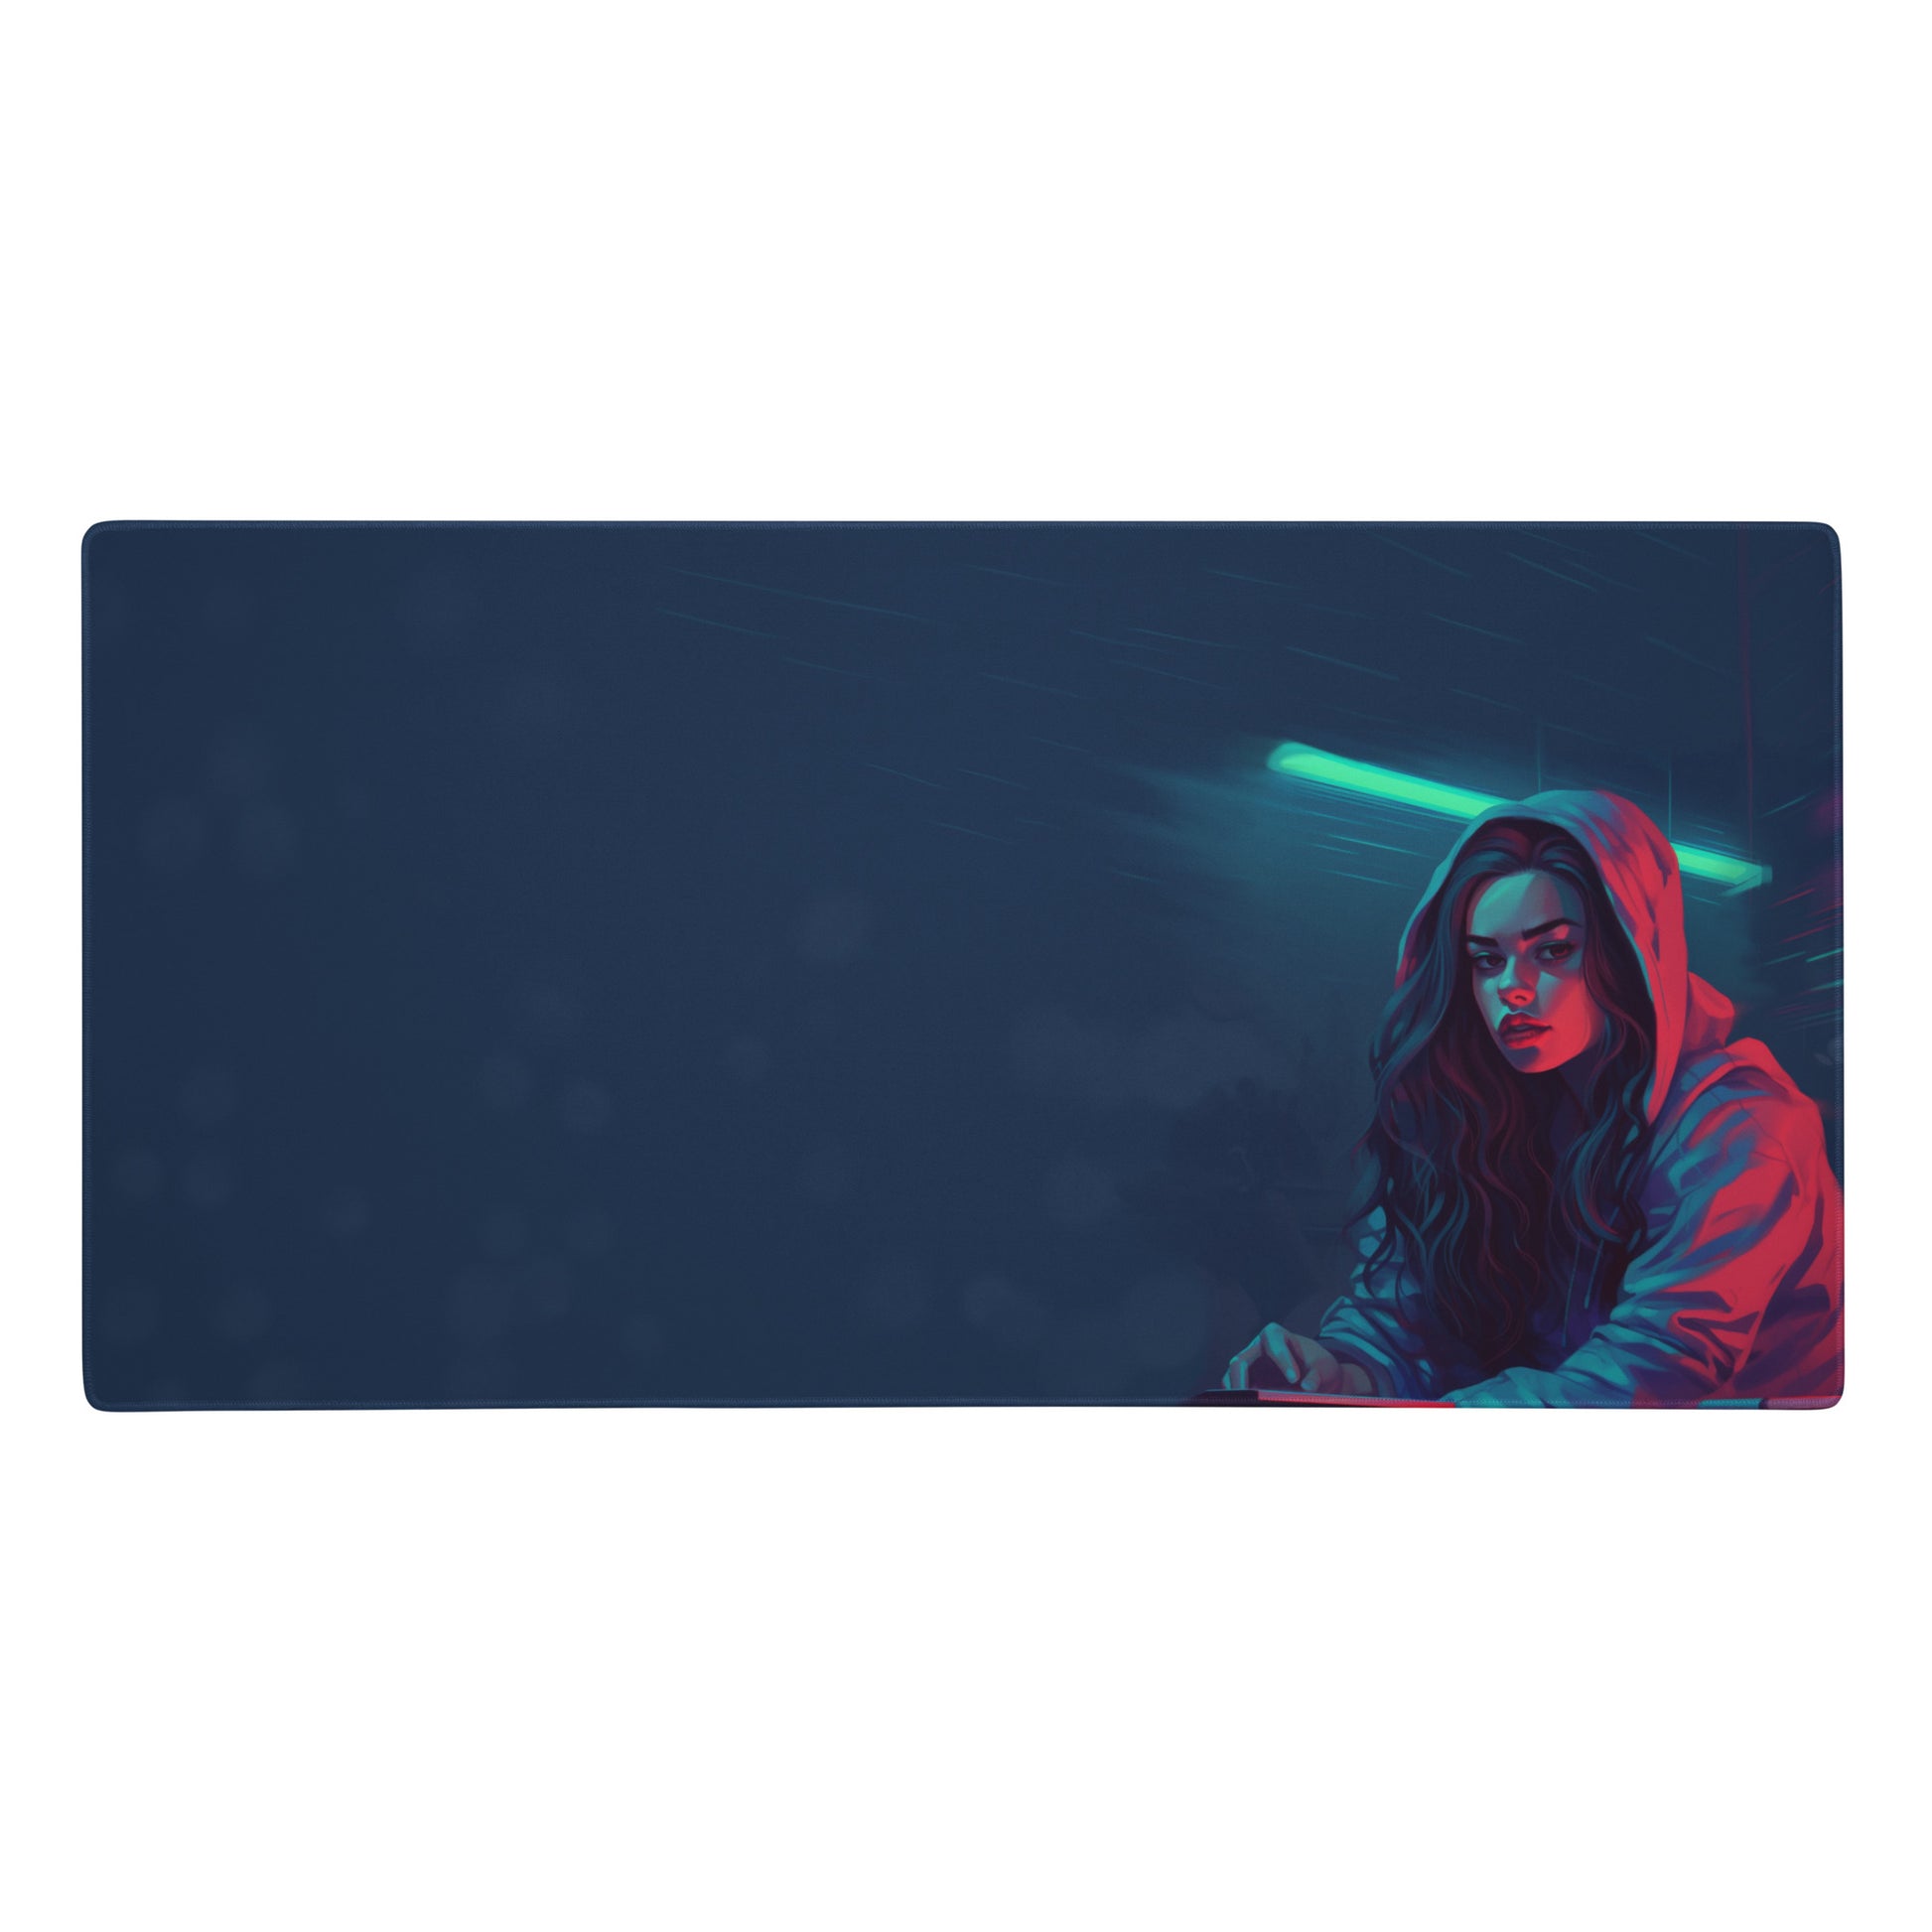 A 36" x 18" blue desk pad with a girl in a hoodie.